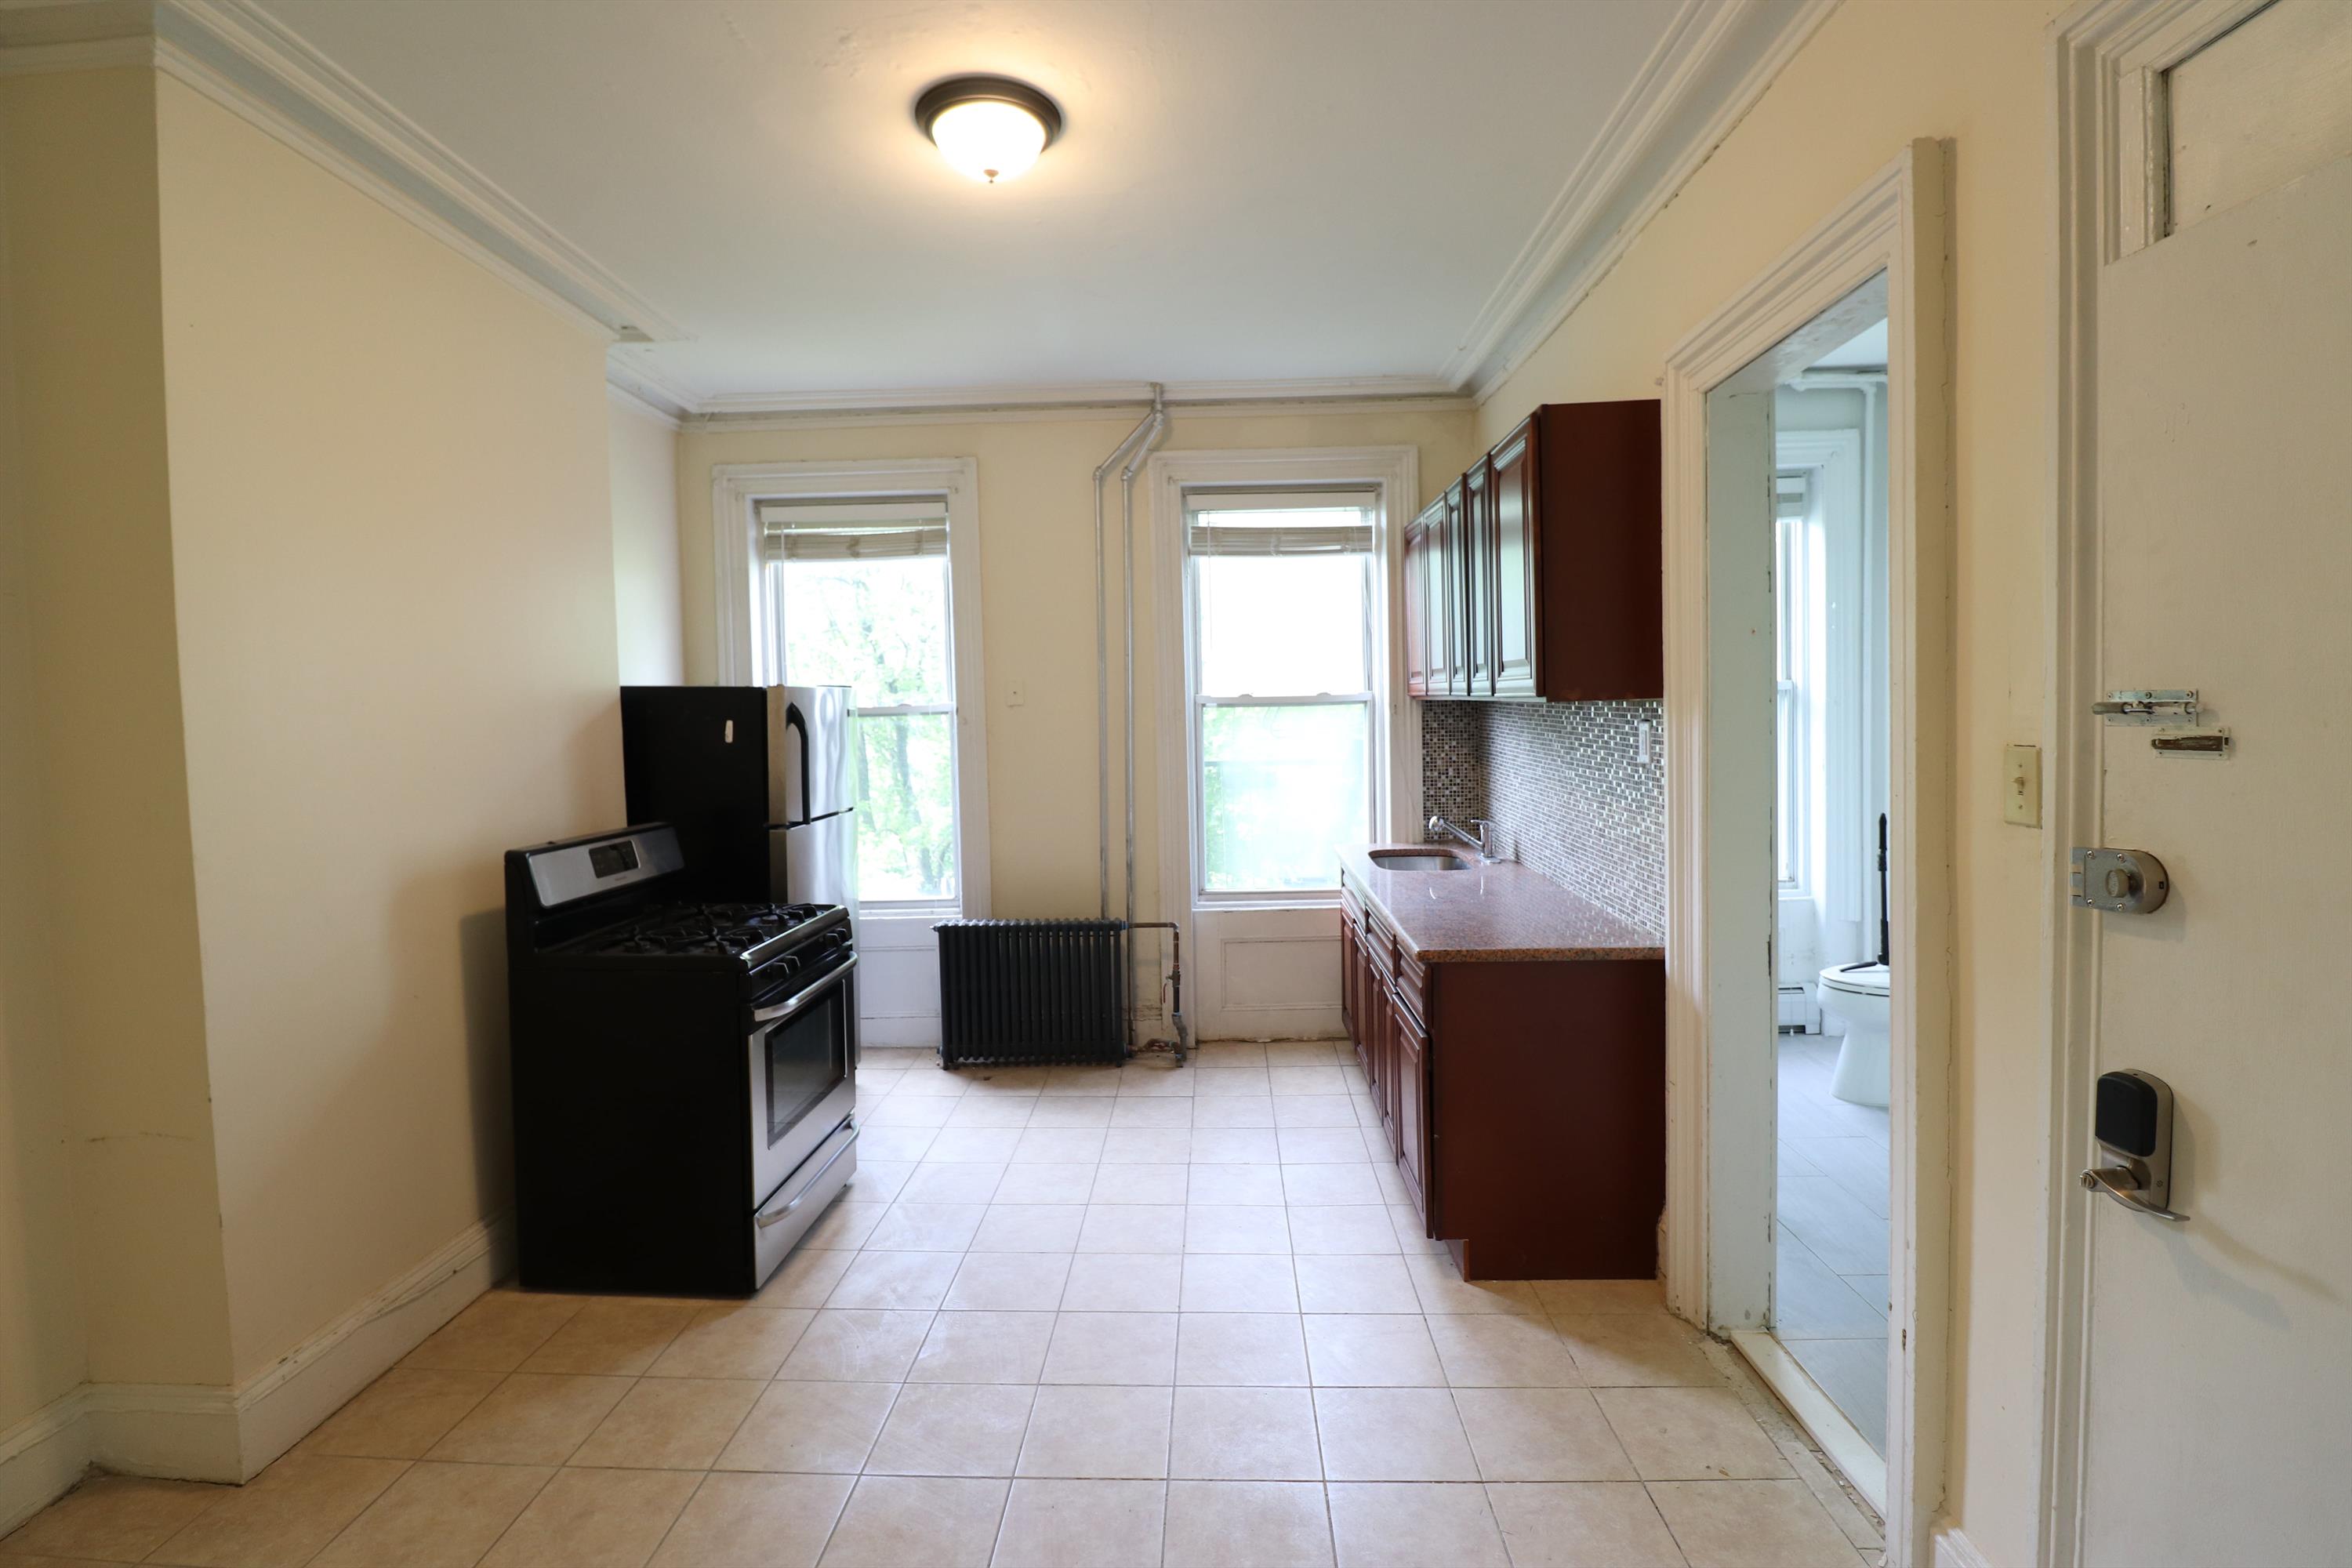 No broker fee! Newly renovated nice sized 1 bedroom in the heart of journal square! Property features: stainless appliances, eat-in kitchen, hardwood floors, and a shared washer/dryer in the basement. Unit is on the 2nd floor. Available ASAP.